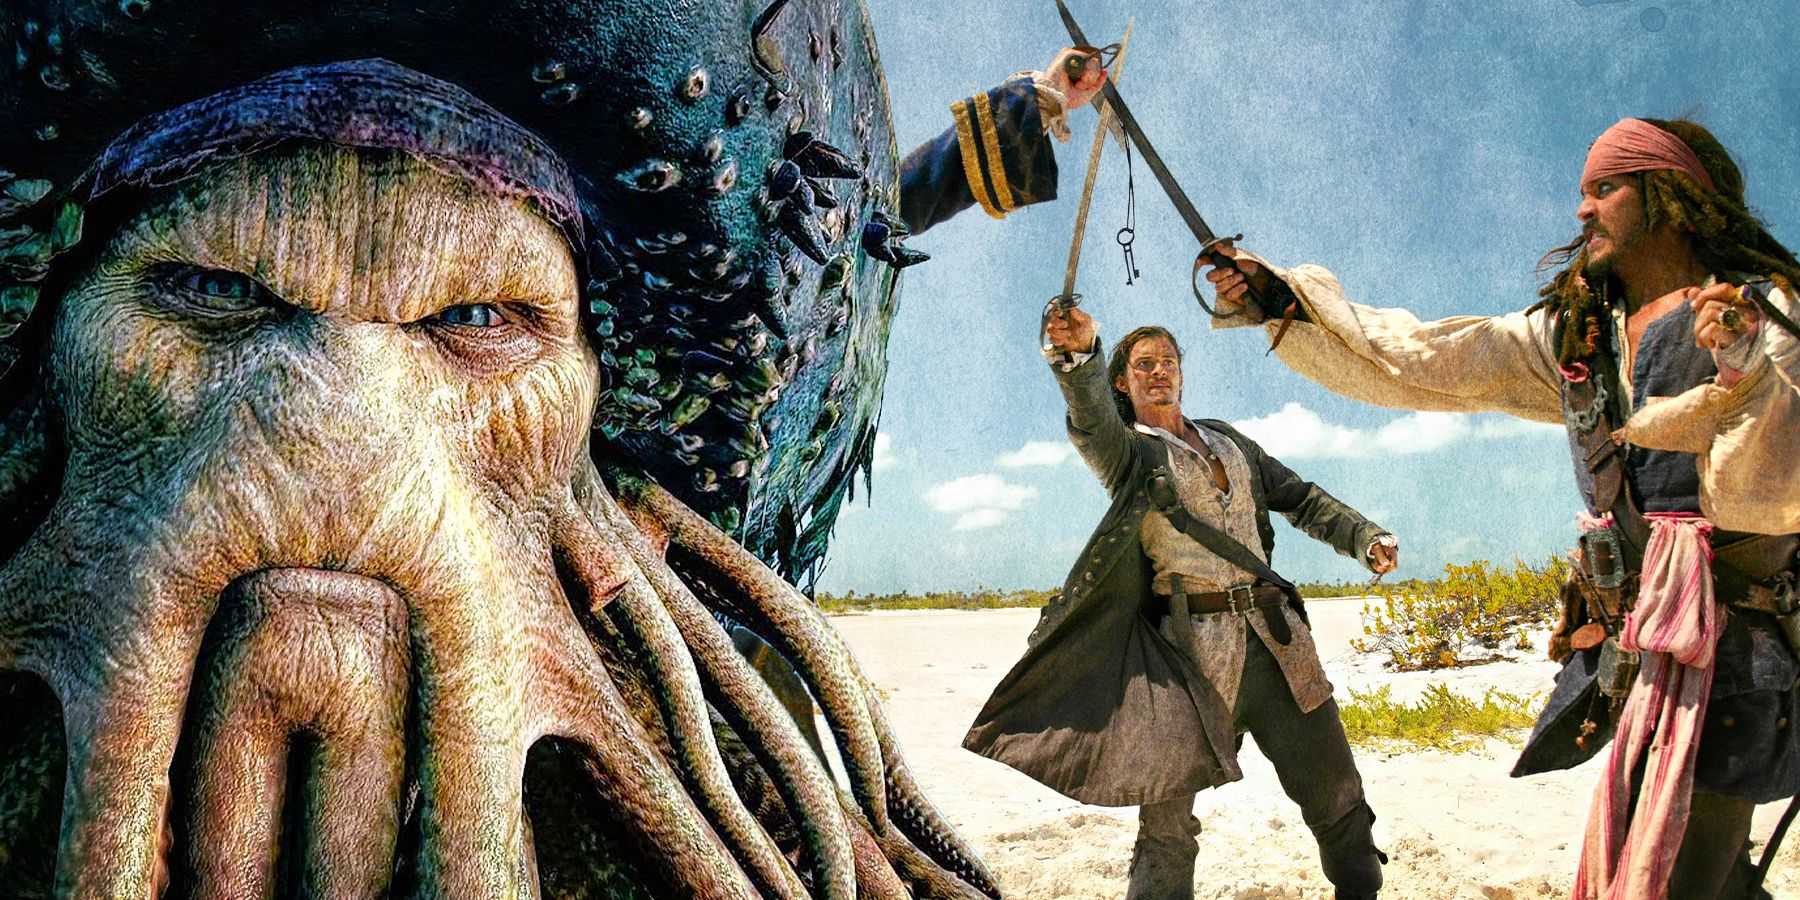 A split image shows Davy Jones and Will turner fighting Jack Sparrow from the Pirates of the Caribbean franchise